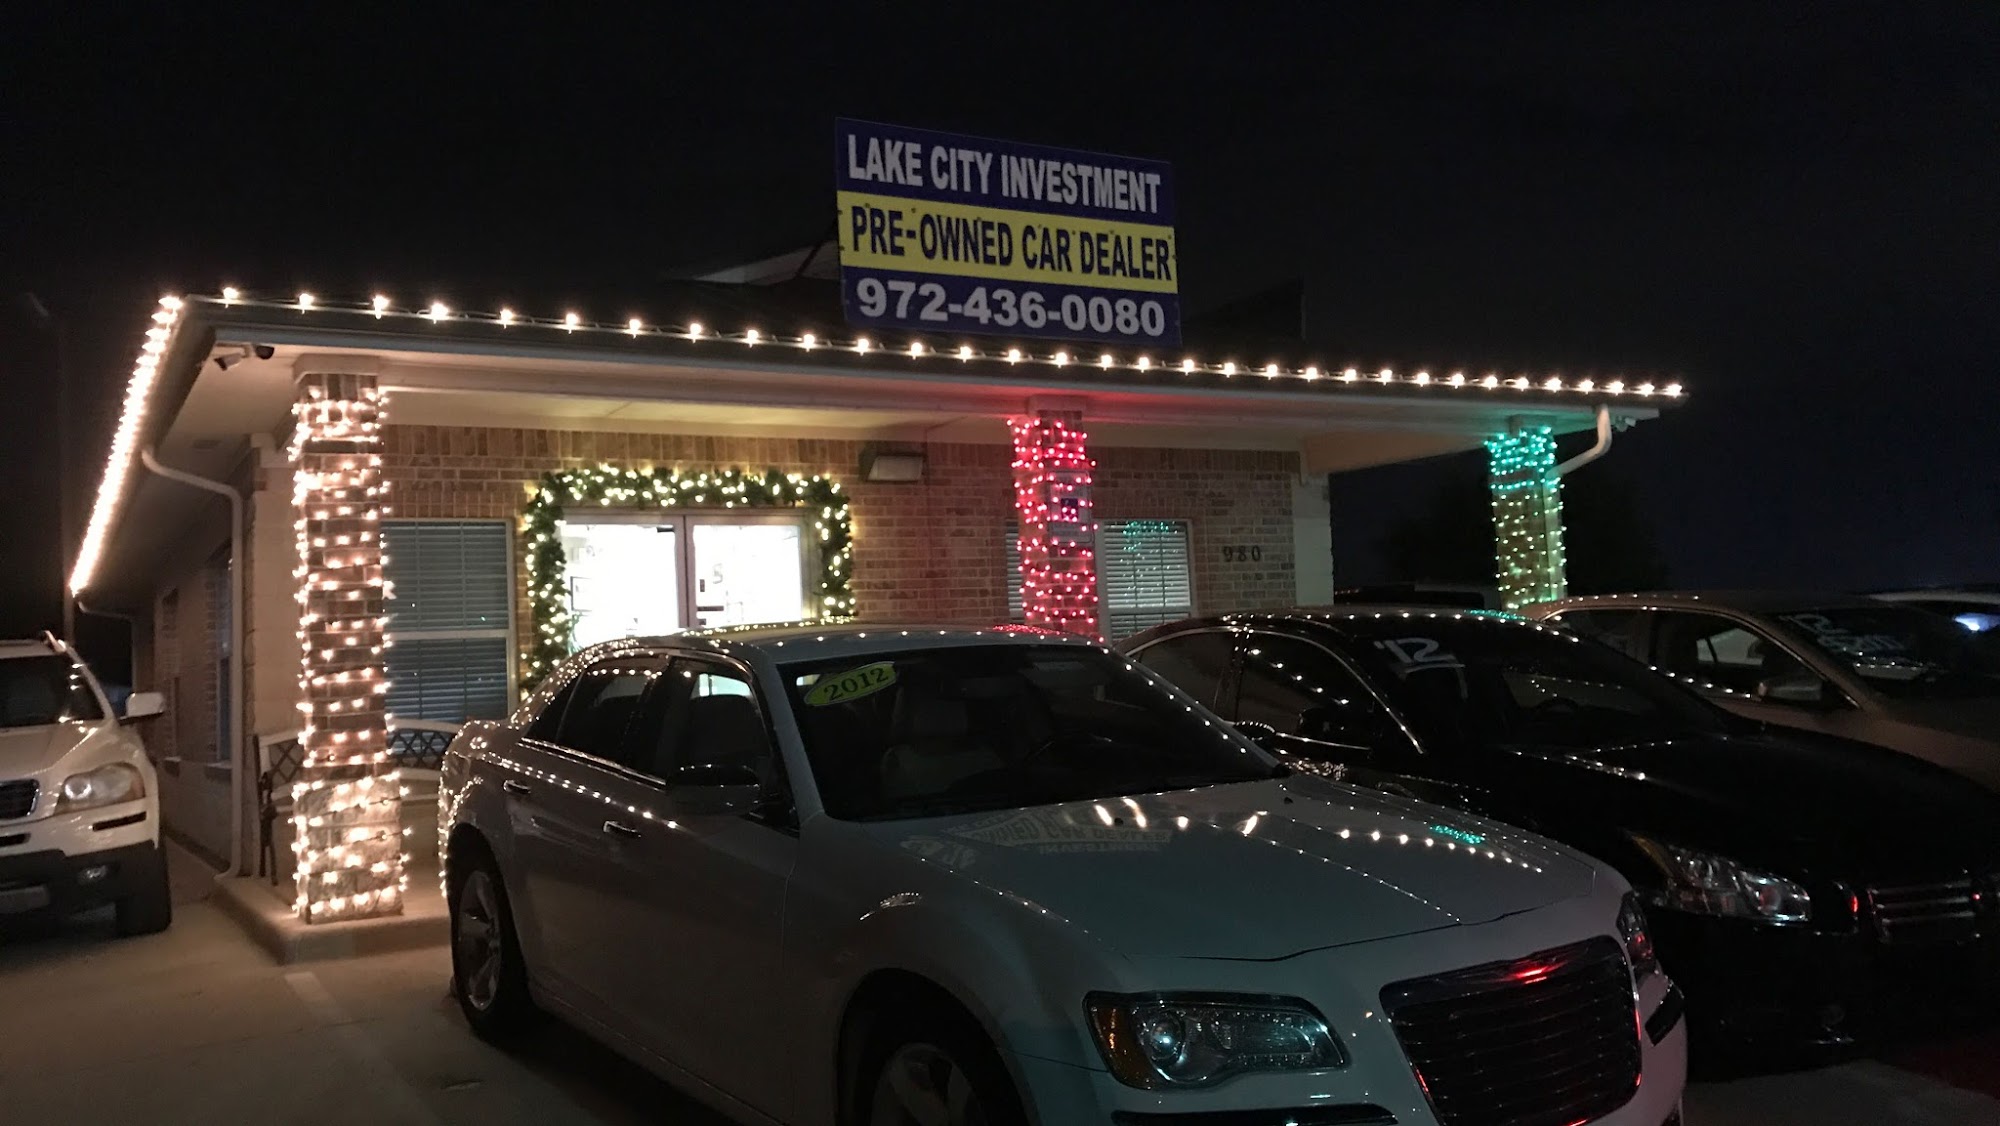 LAKE CITY INVESTMENT, PRE-OWNED CAR DEALER